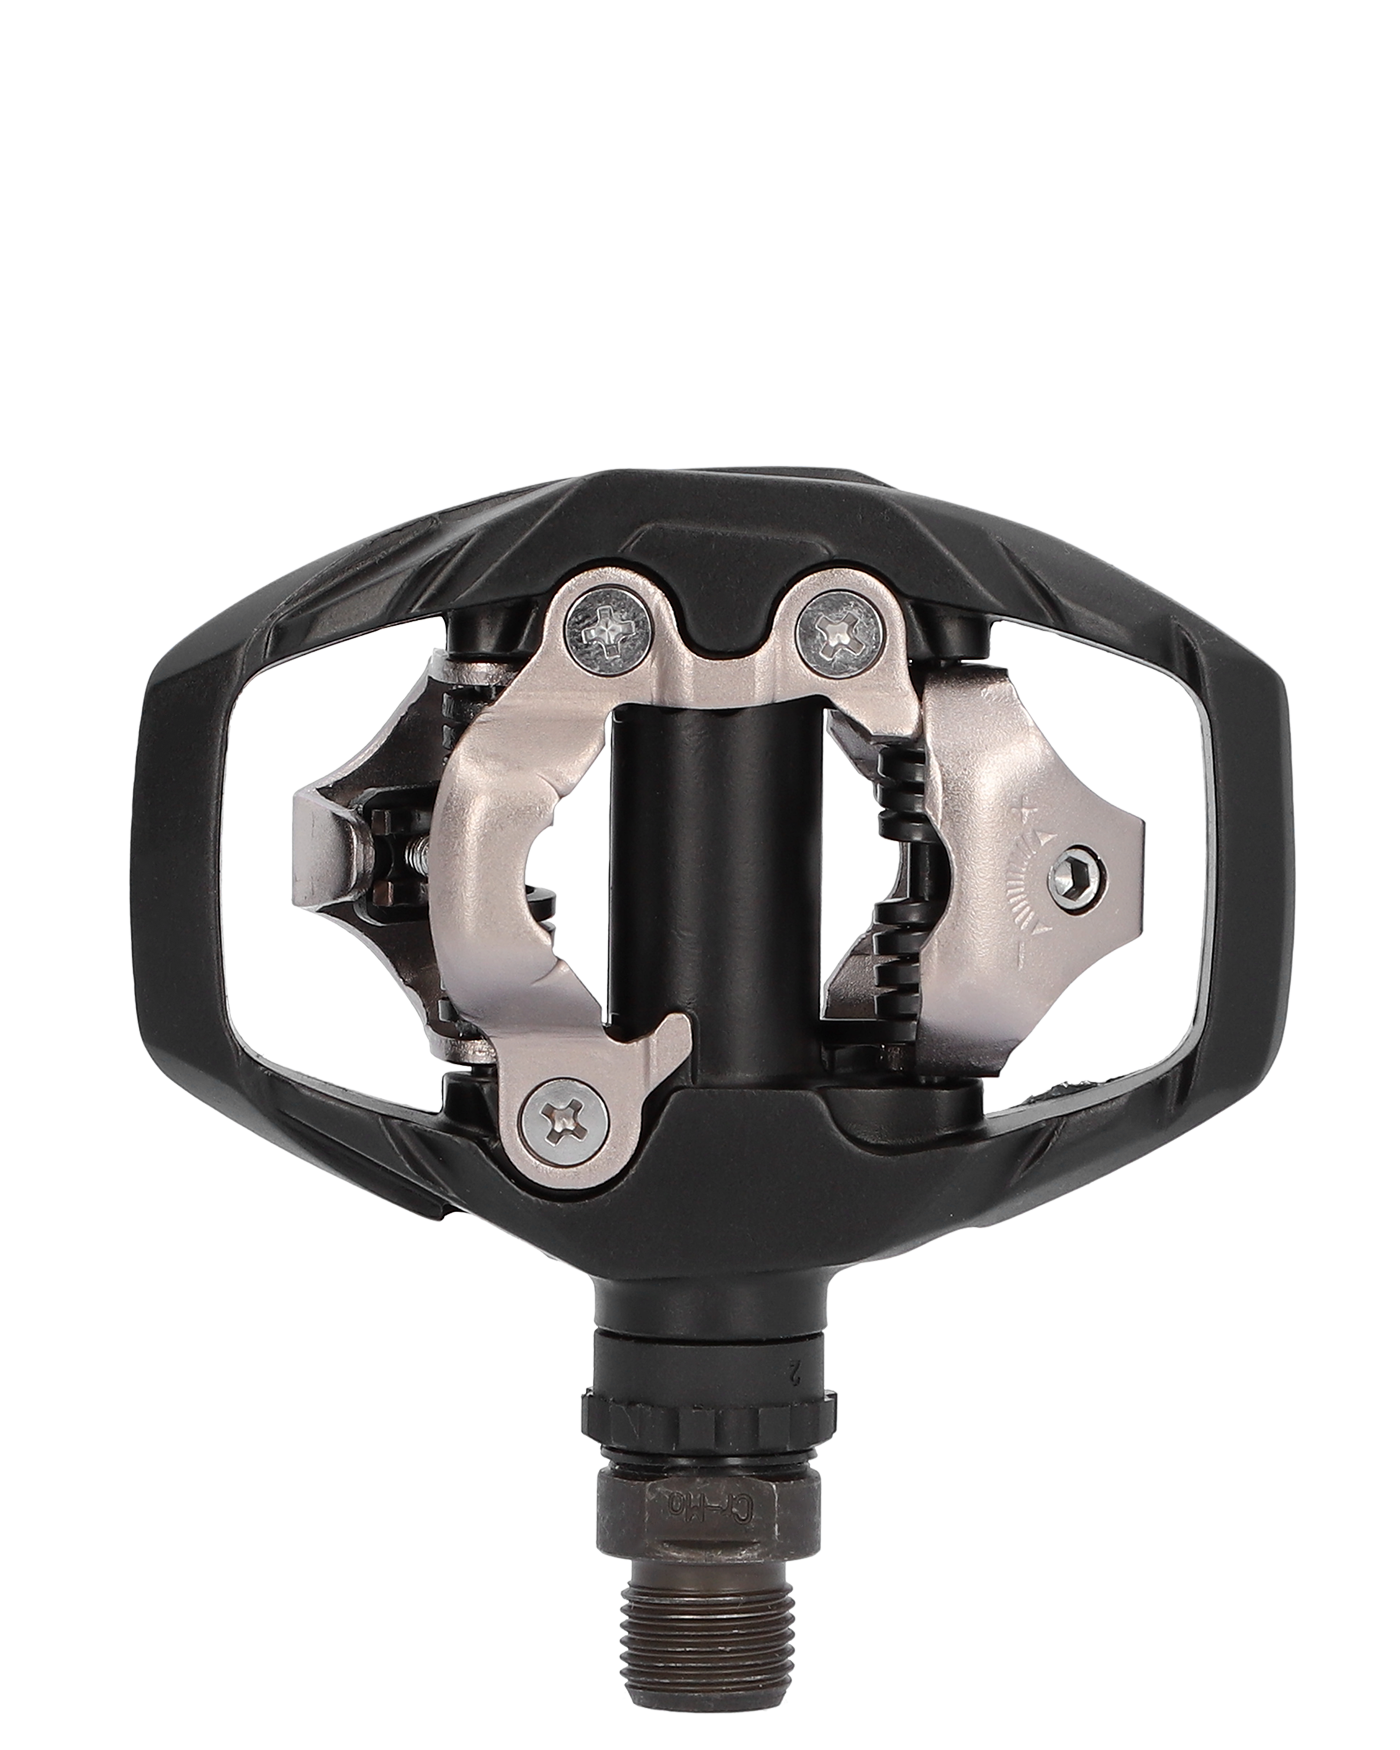 Shimano PD-M530 Pedals | US